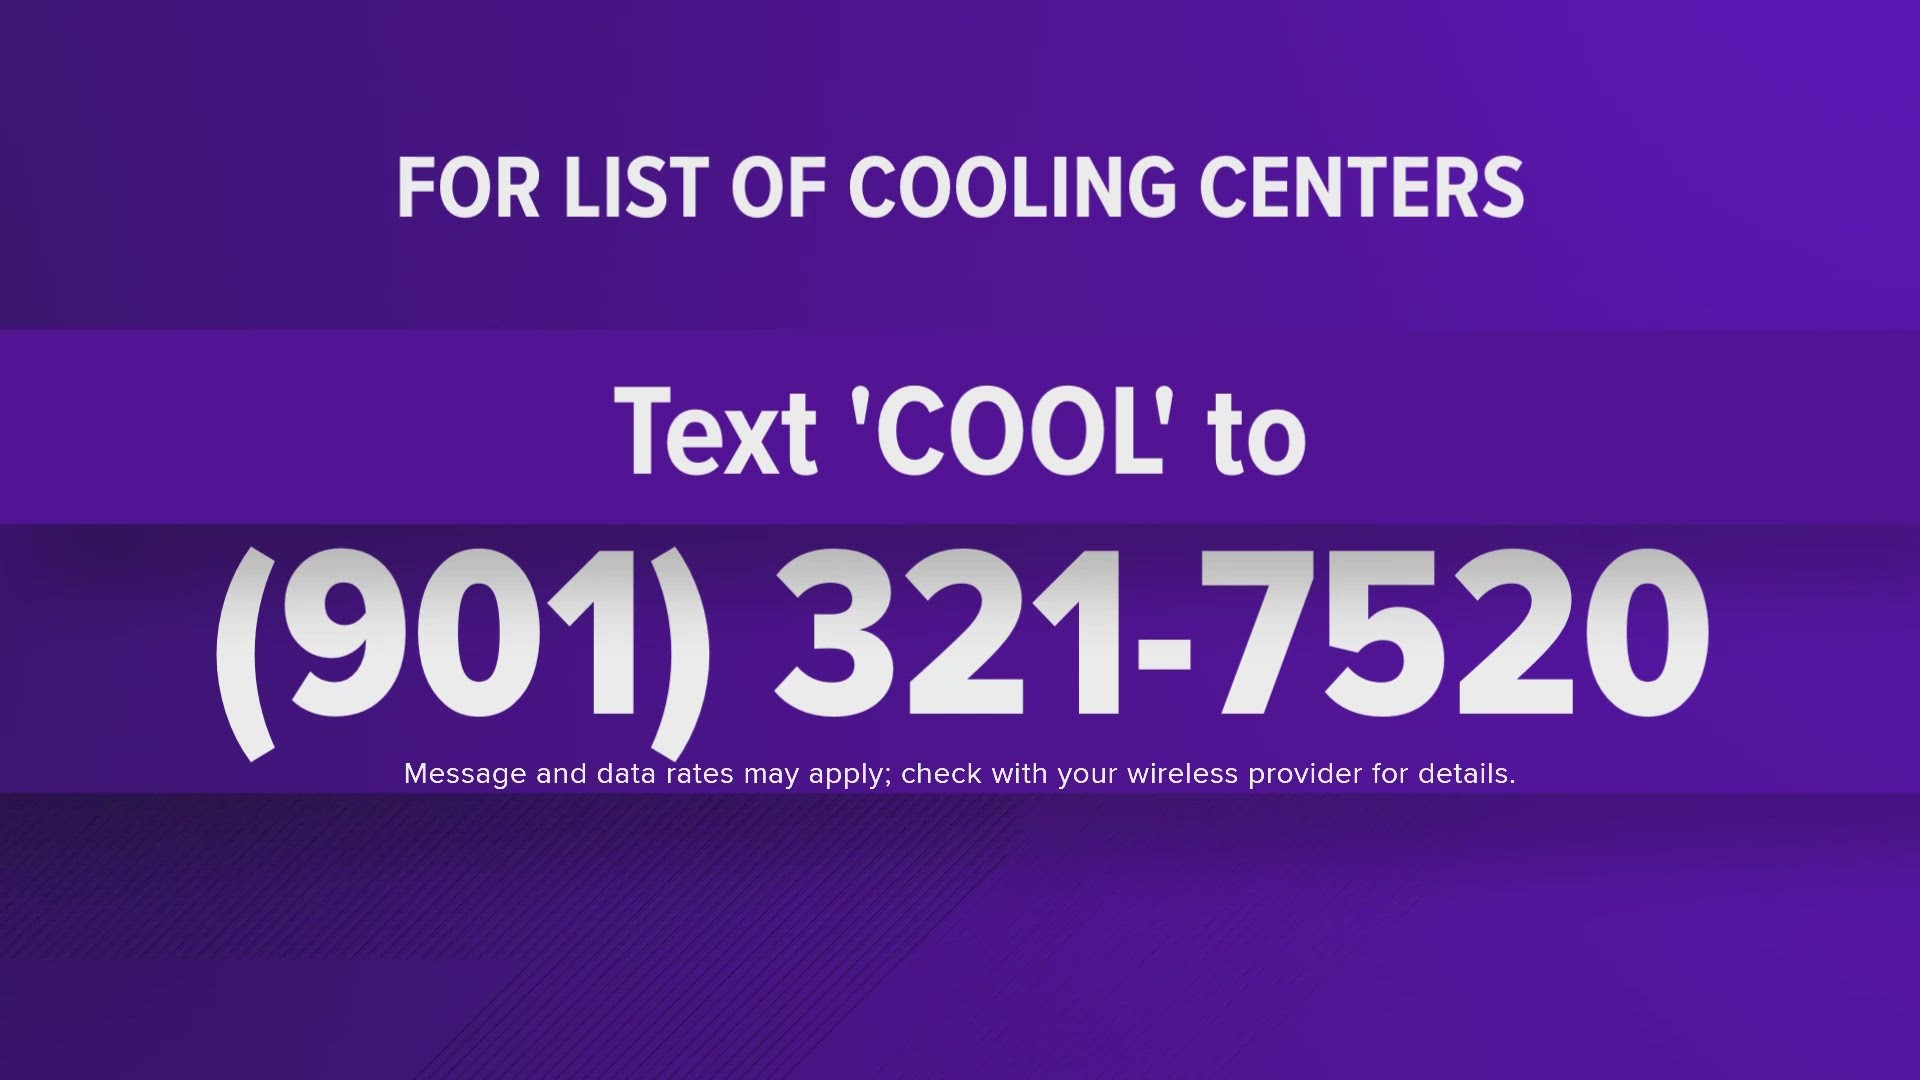 Although the cooling center is closed at Frayser, the Hospitality Hub is still open for residents without homes who need to cool down.